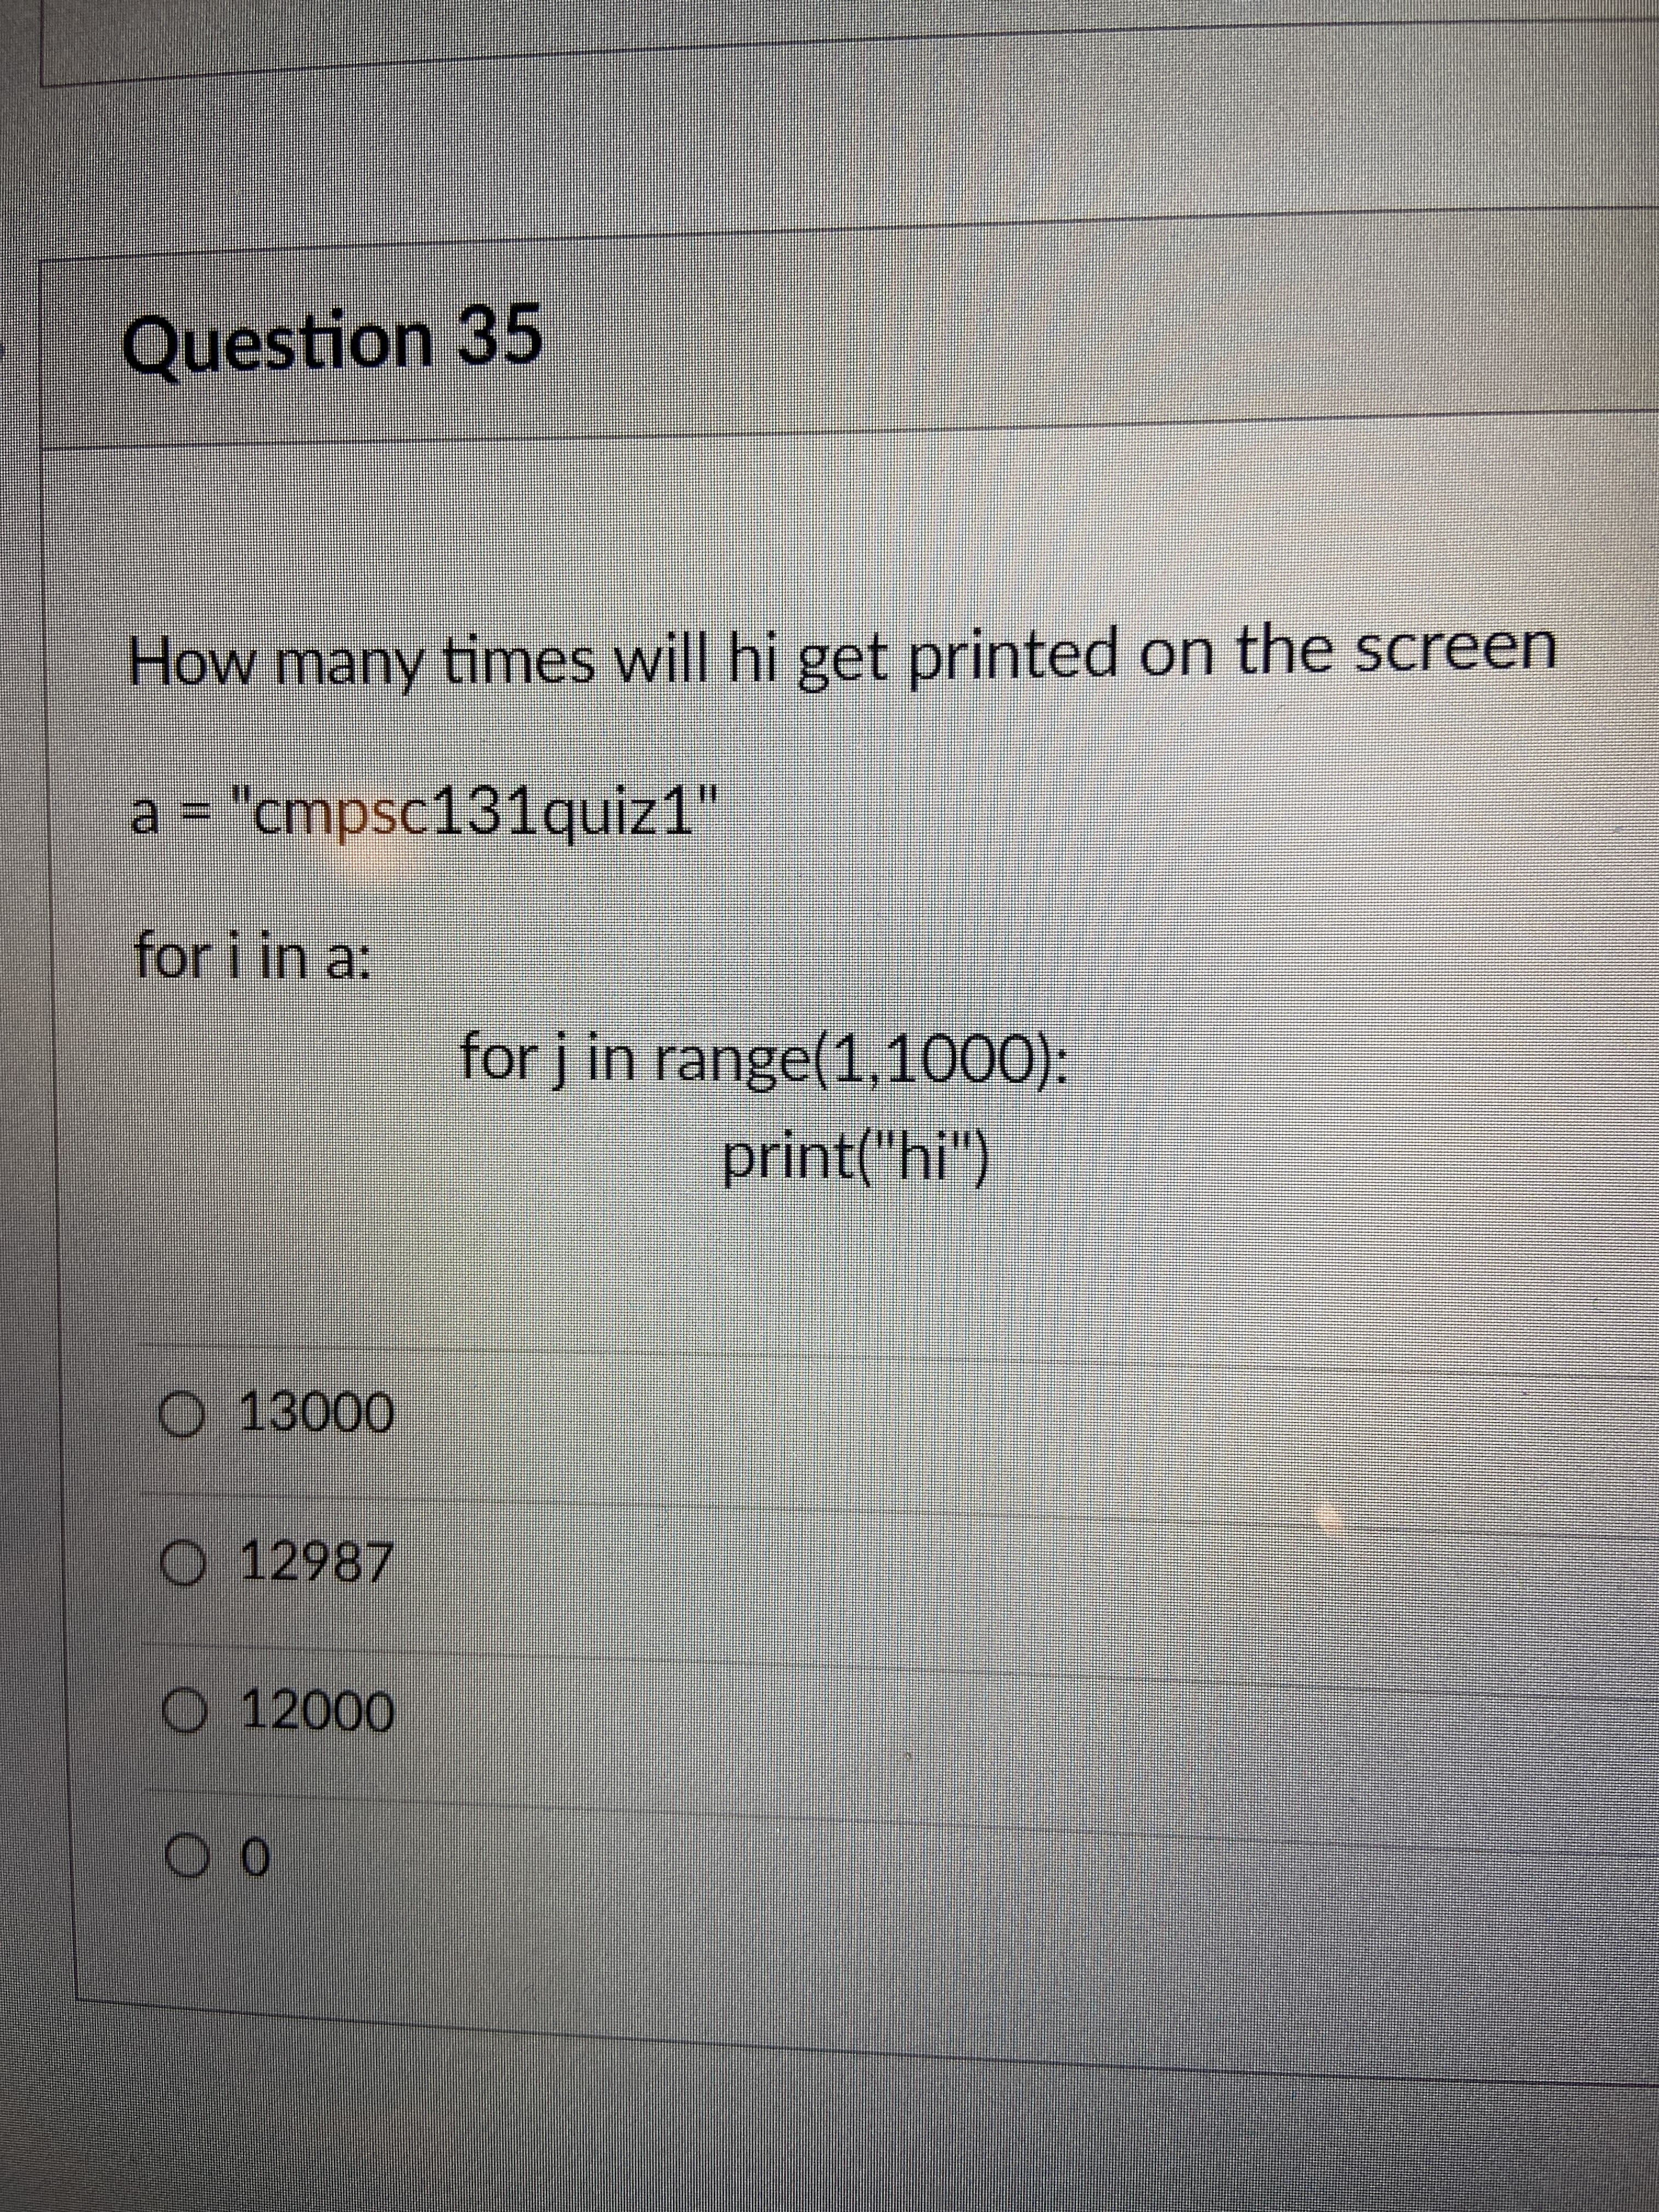 Question 35
How many times will hi get printed on the screen
a = "cmpsc131quiz1"
for i in a:
for j in range(1,1000):
print("hi")
O 13000
12987
O 12000
0O
